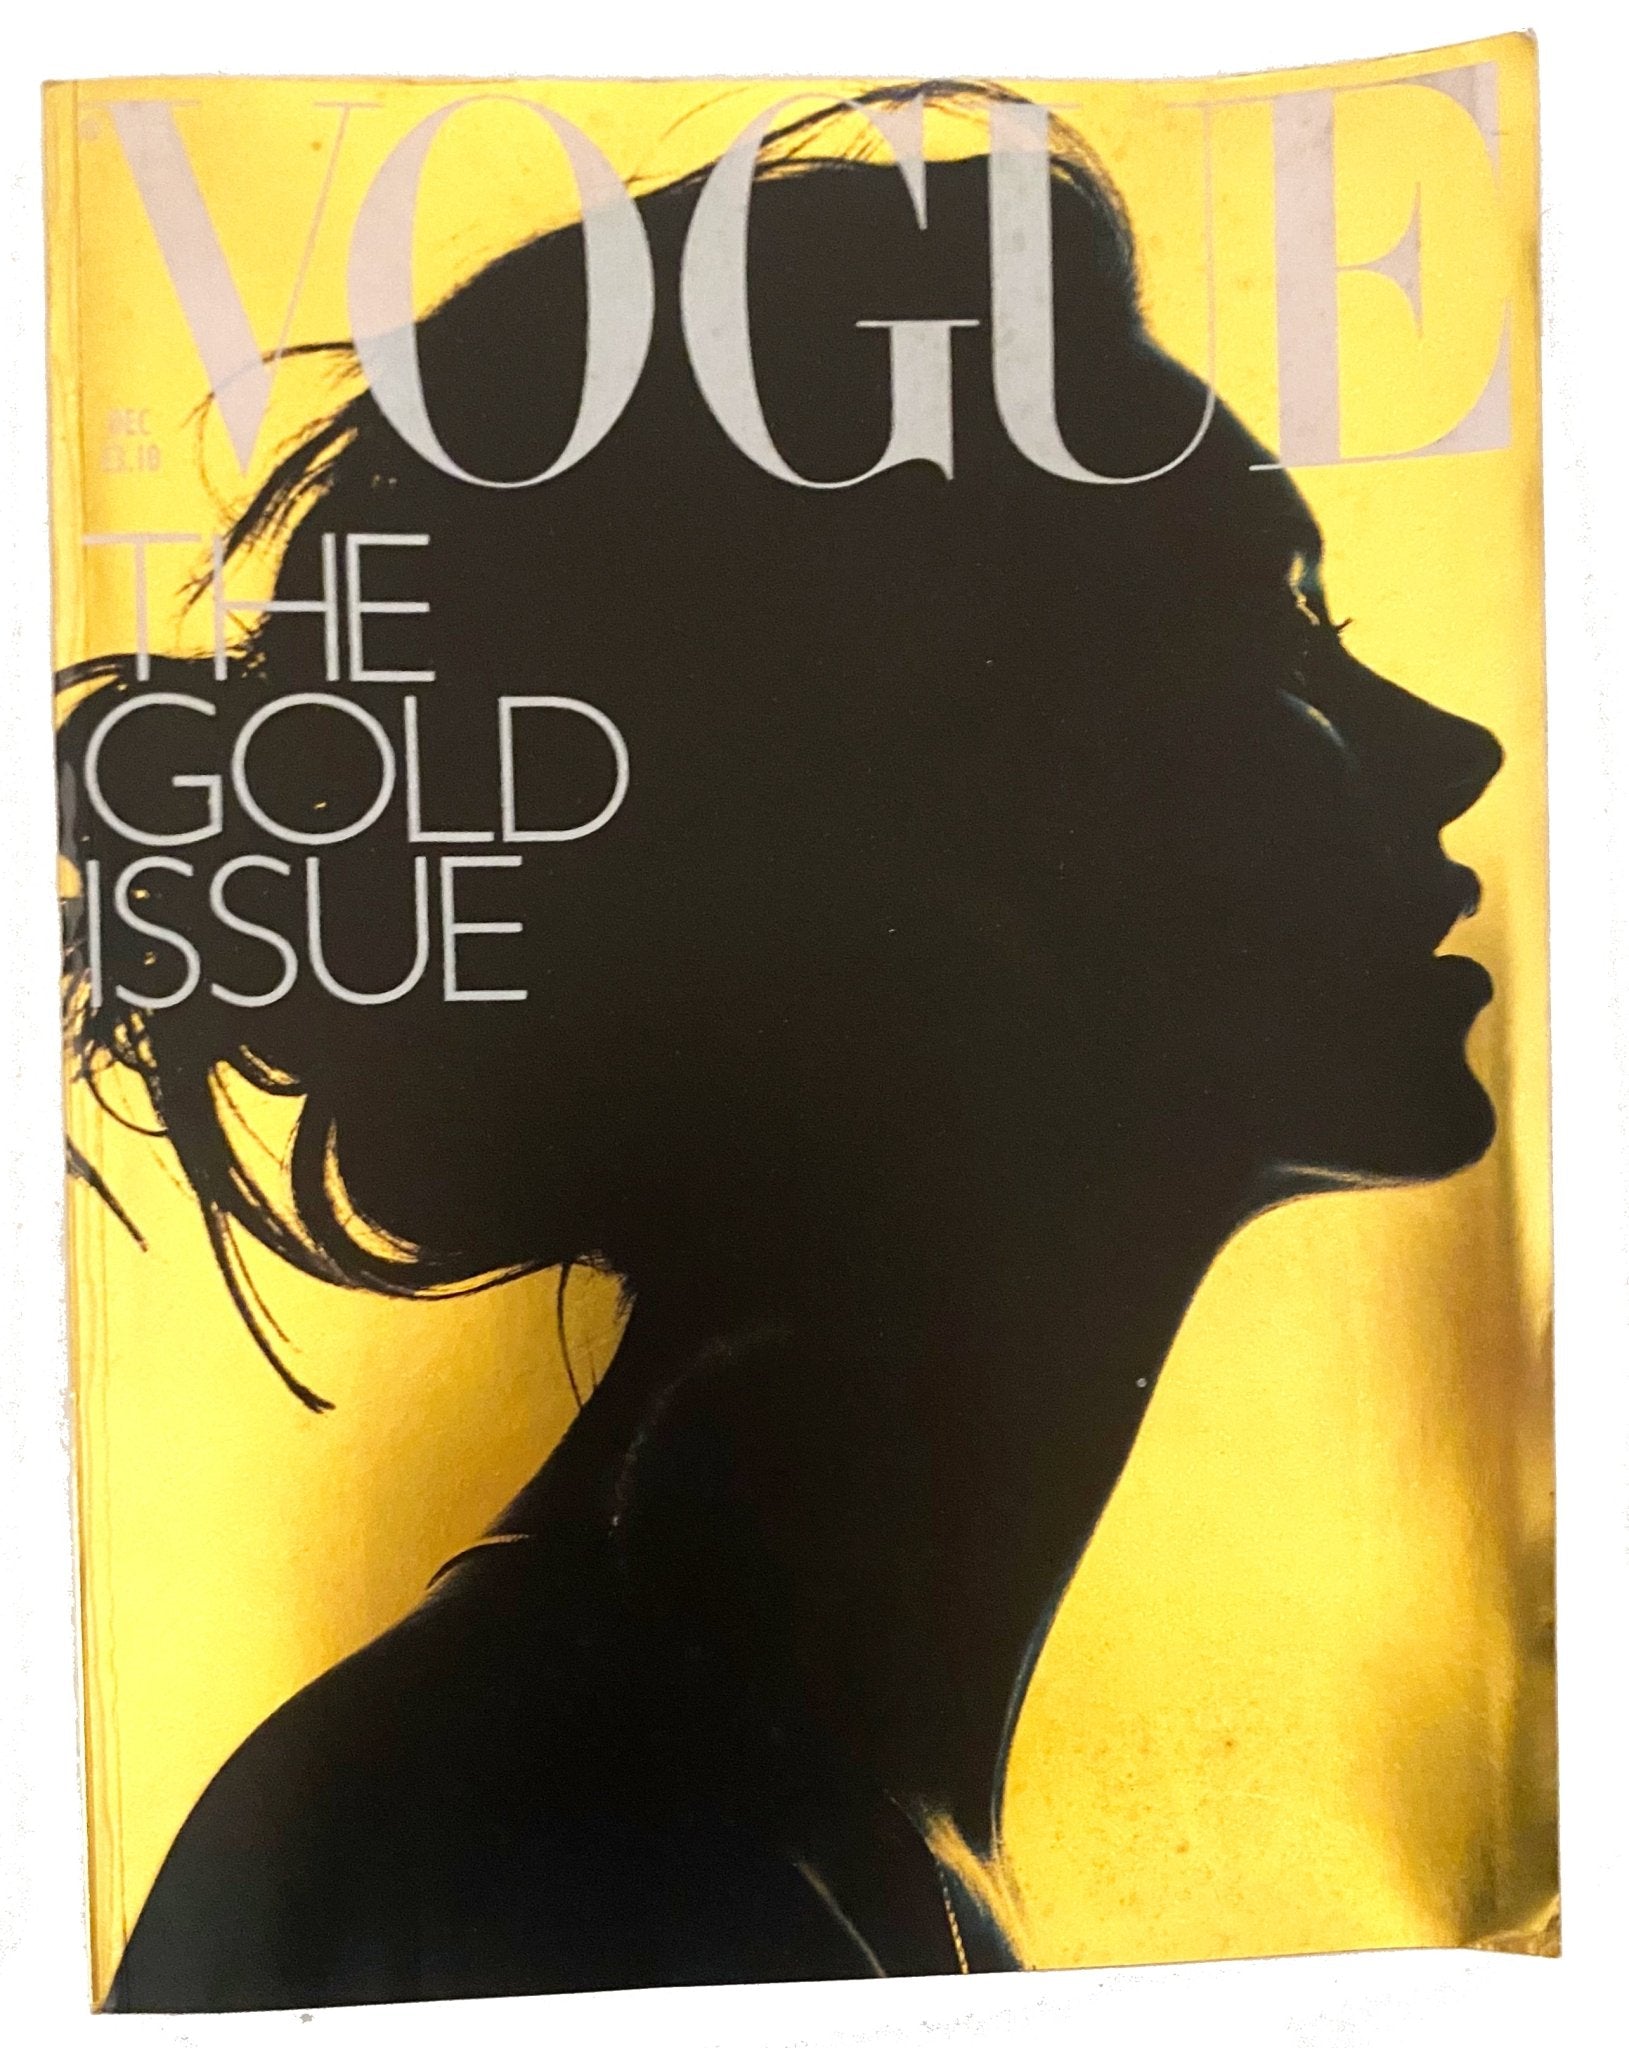 2000 VOGUE - "THE GOLD ISSUE" - COVER BY NICK KNIGHT - style - CHNGR